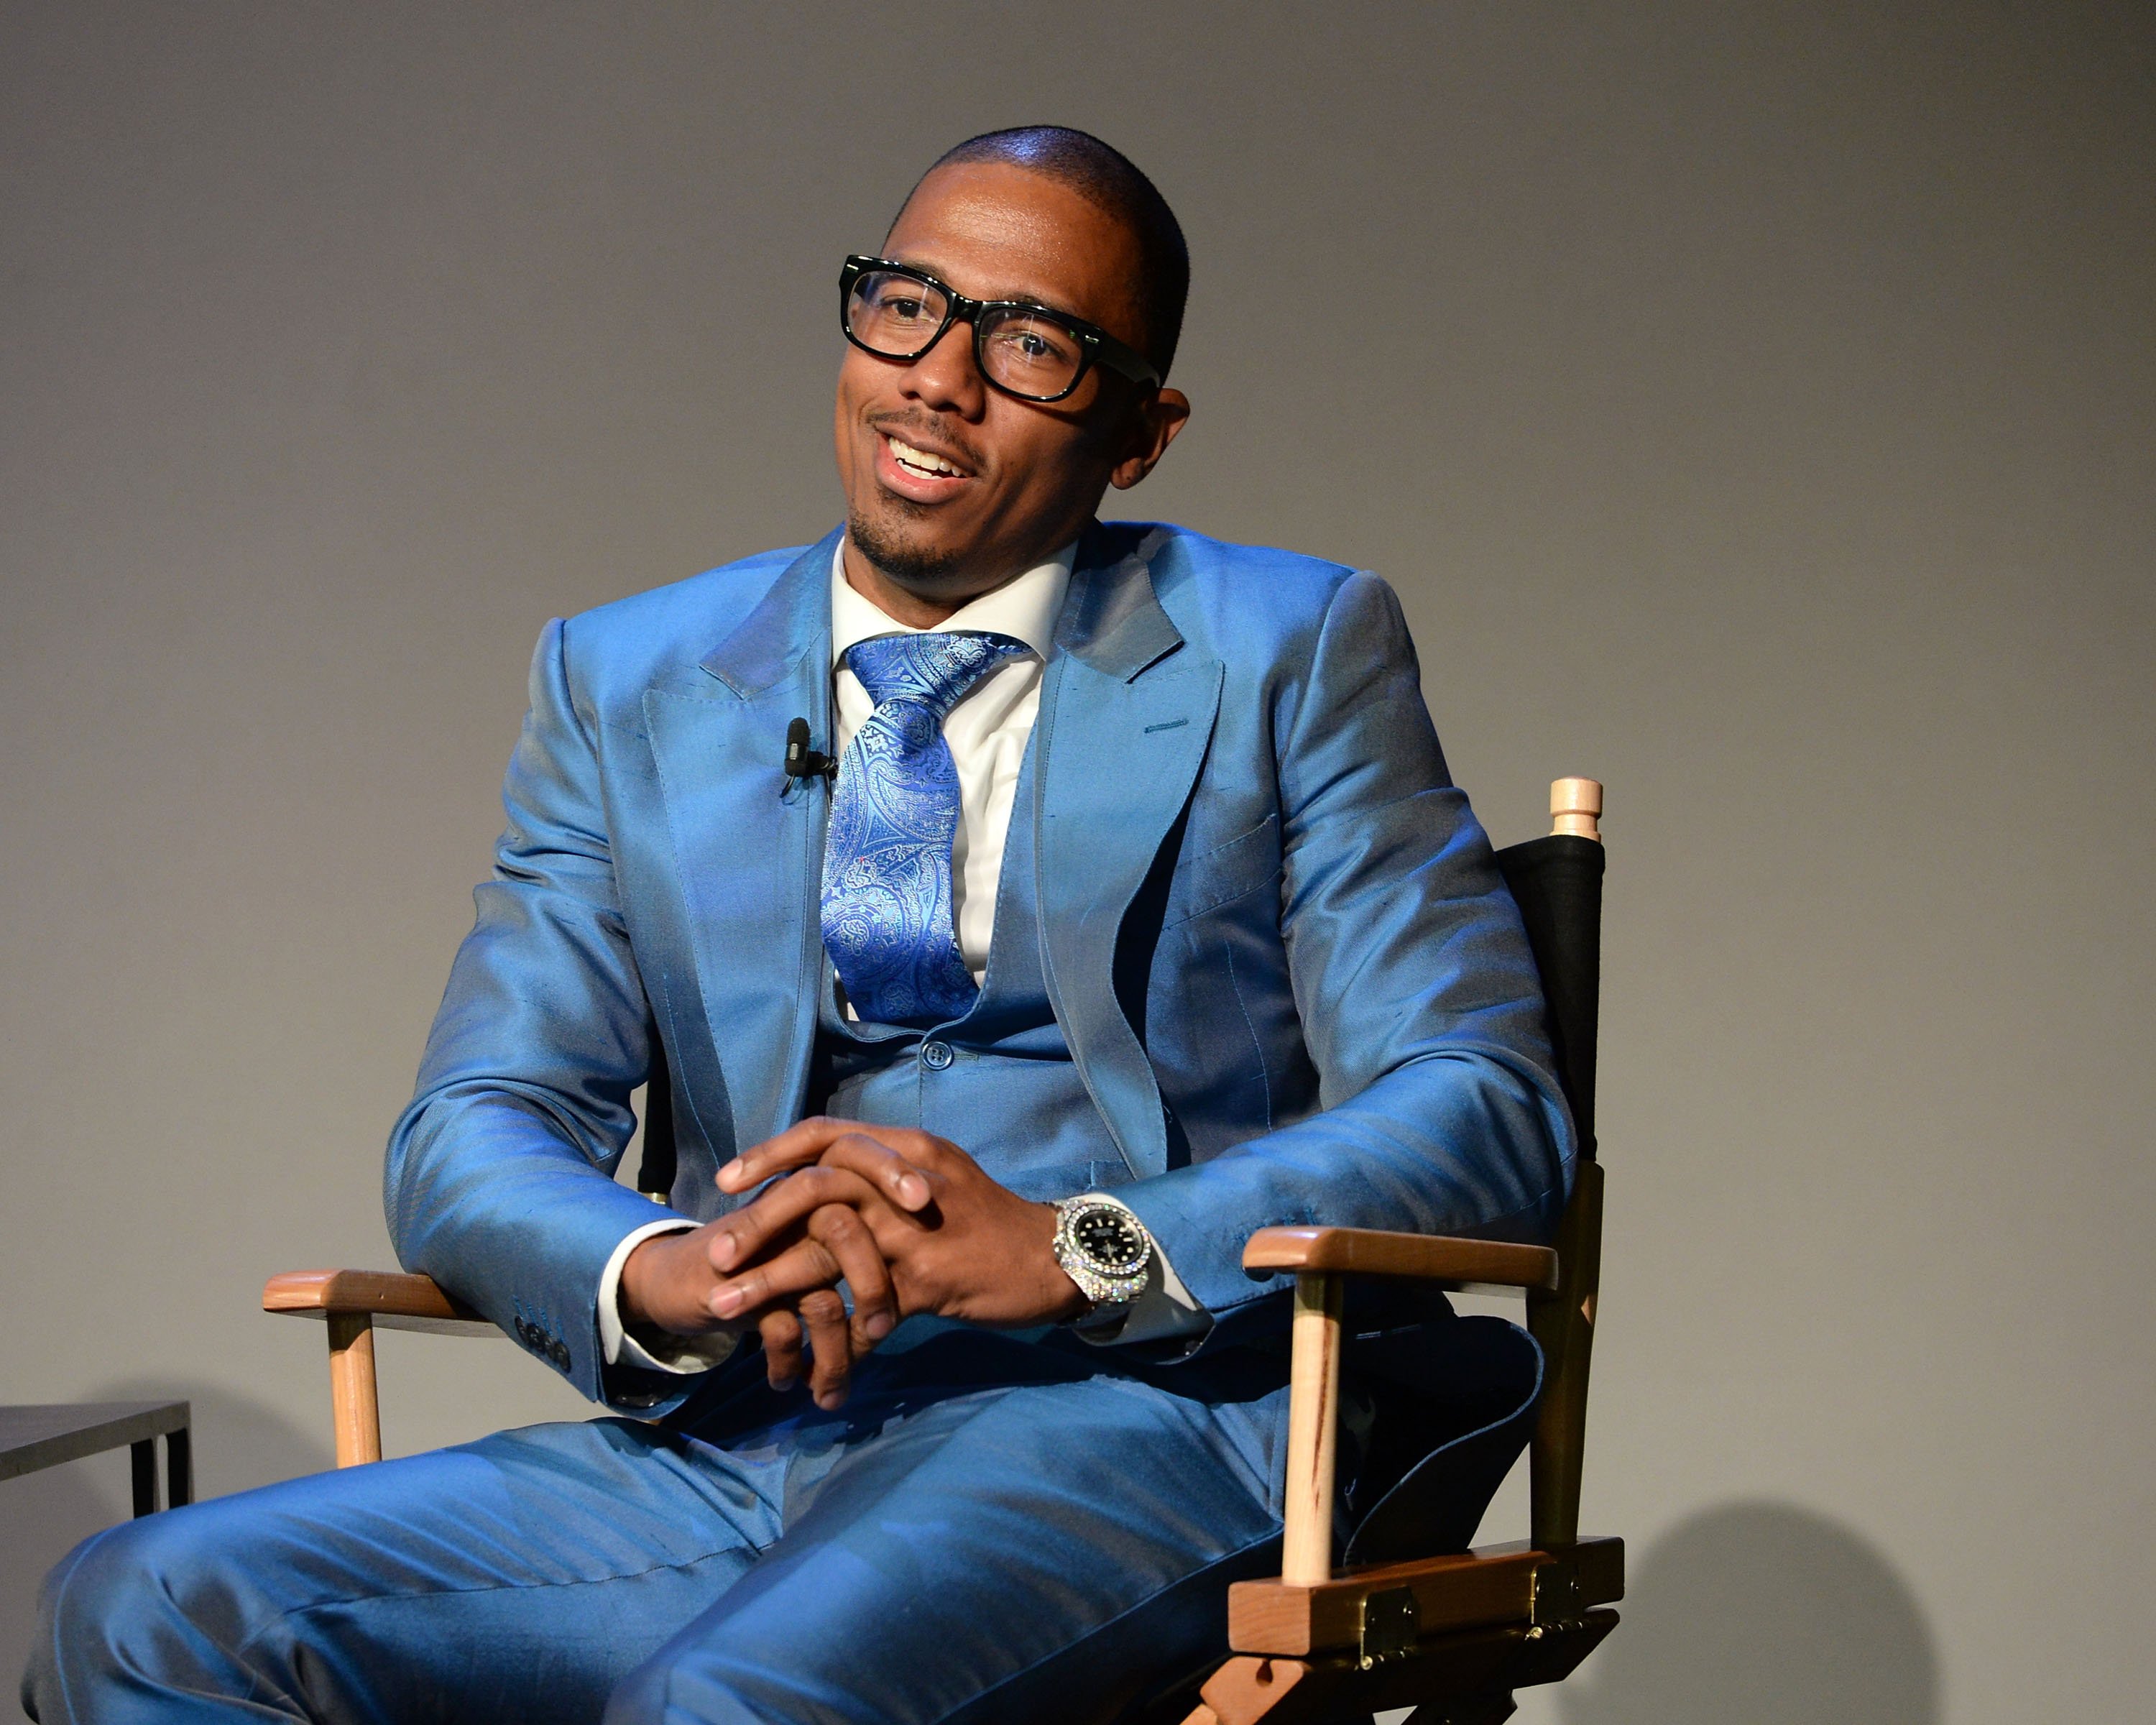 Nick Cannon attends Meet The Author: Nick Cannon, as he promotes his children's book "Neon Aliens Ate My Homework" at the Apple Store Soho on March 16, 2015 in New York City. | Source: Getty Images